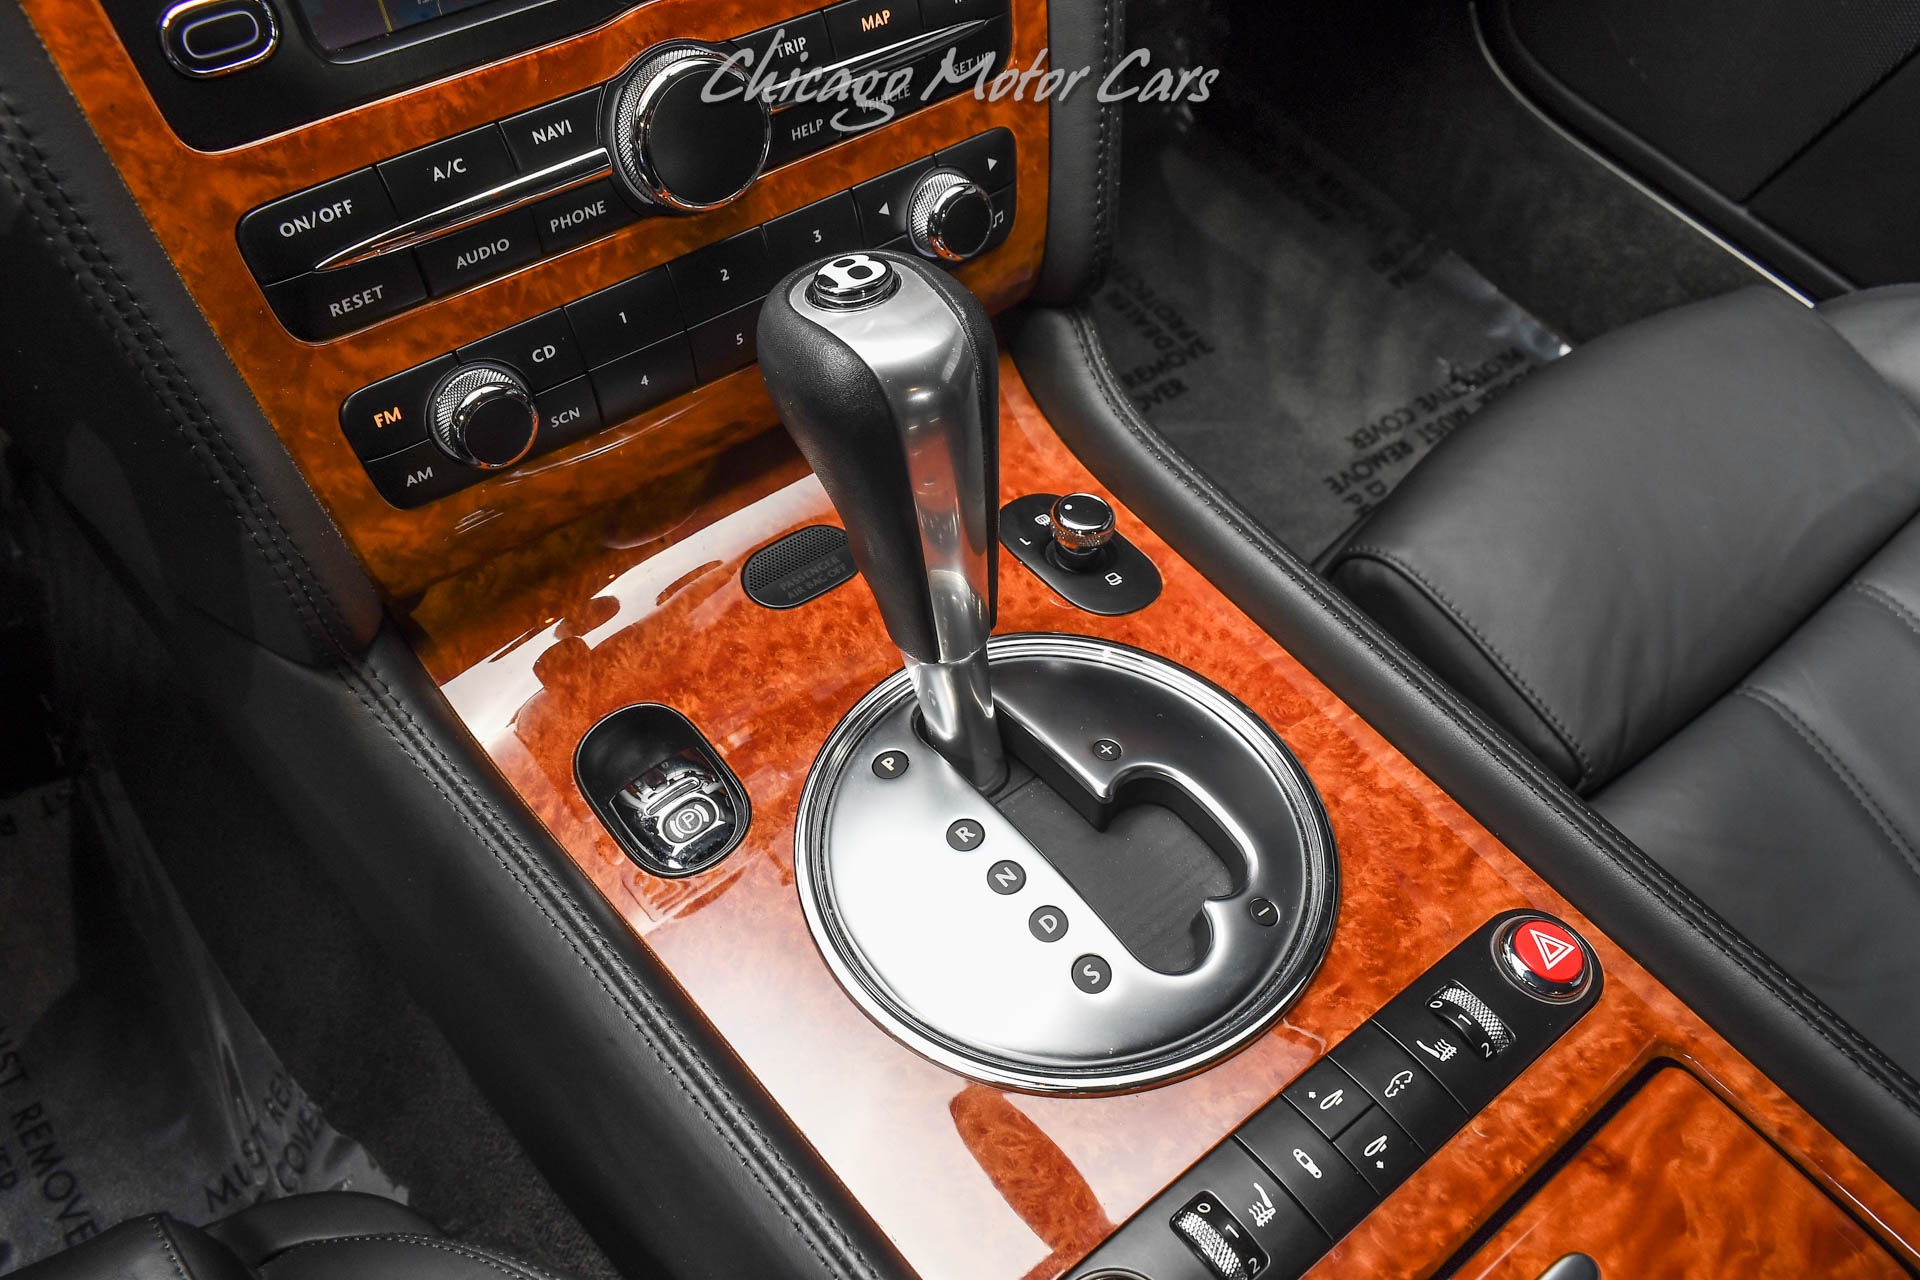 Used-2005-Bentley-Continental-GT-Only-4K-Original-Miles-PPF-Private-Collection-Bentley-Serviced